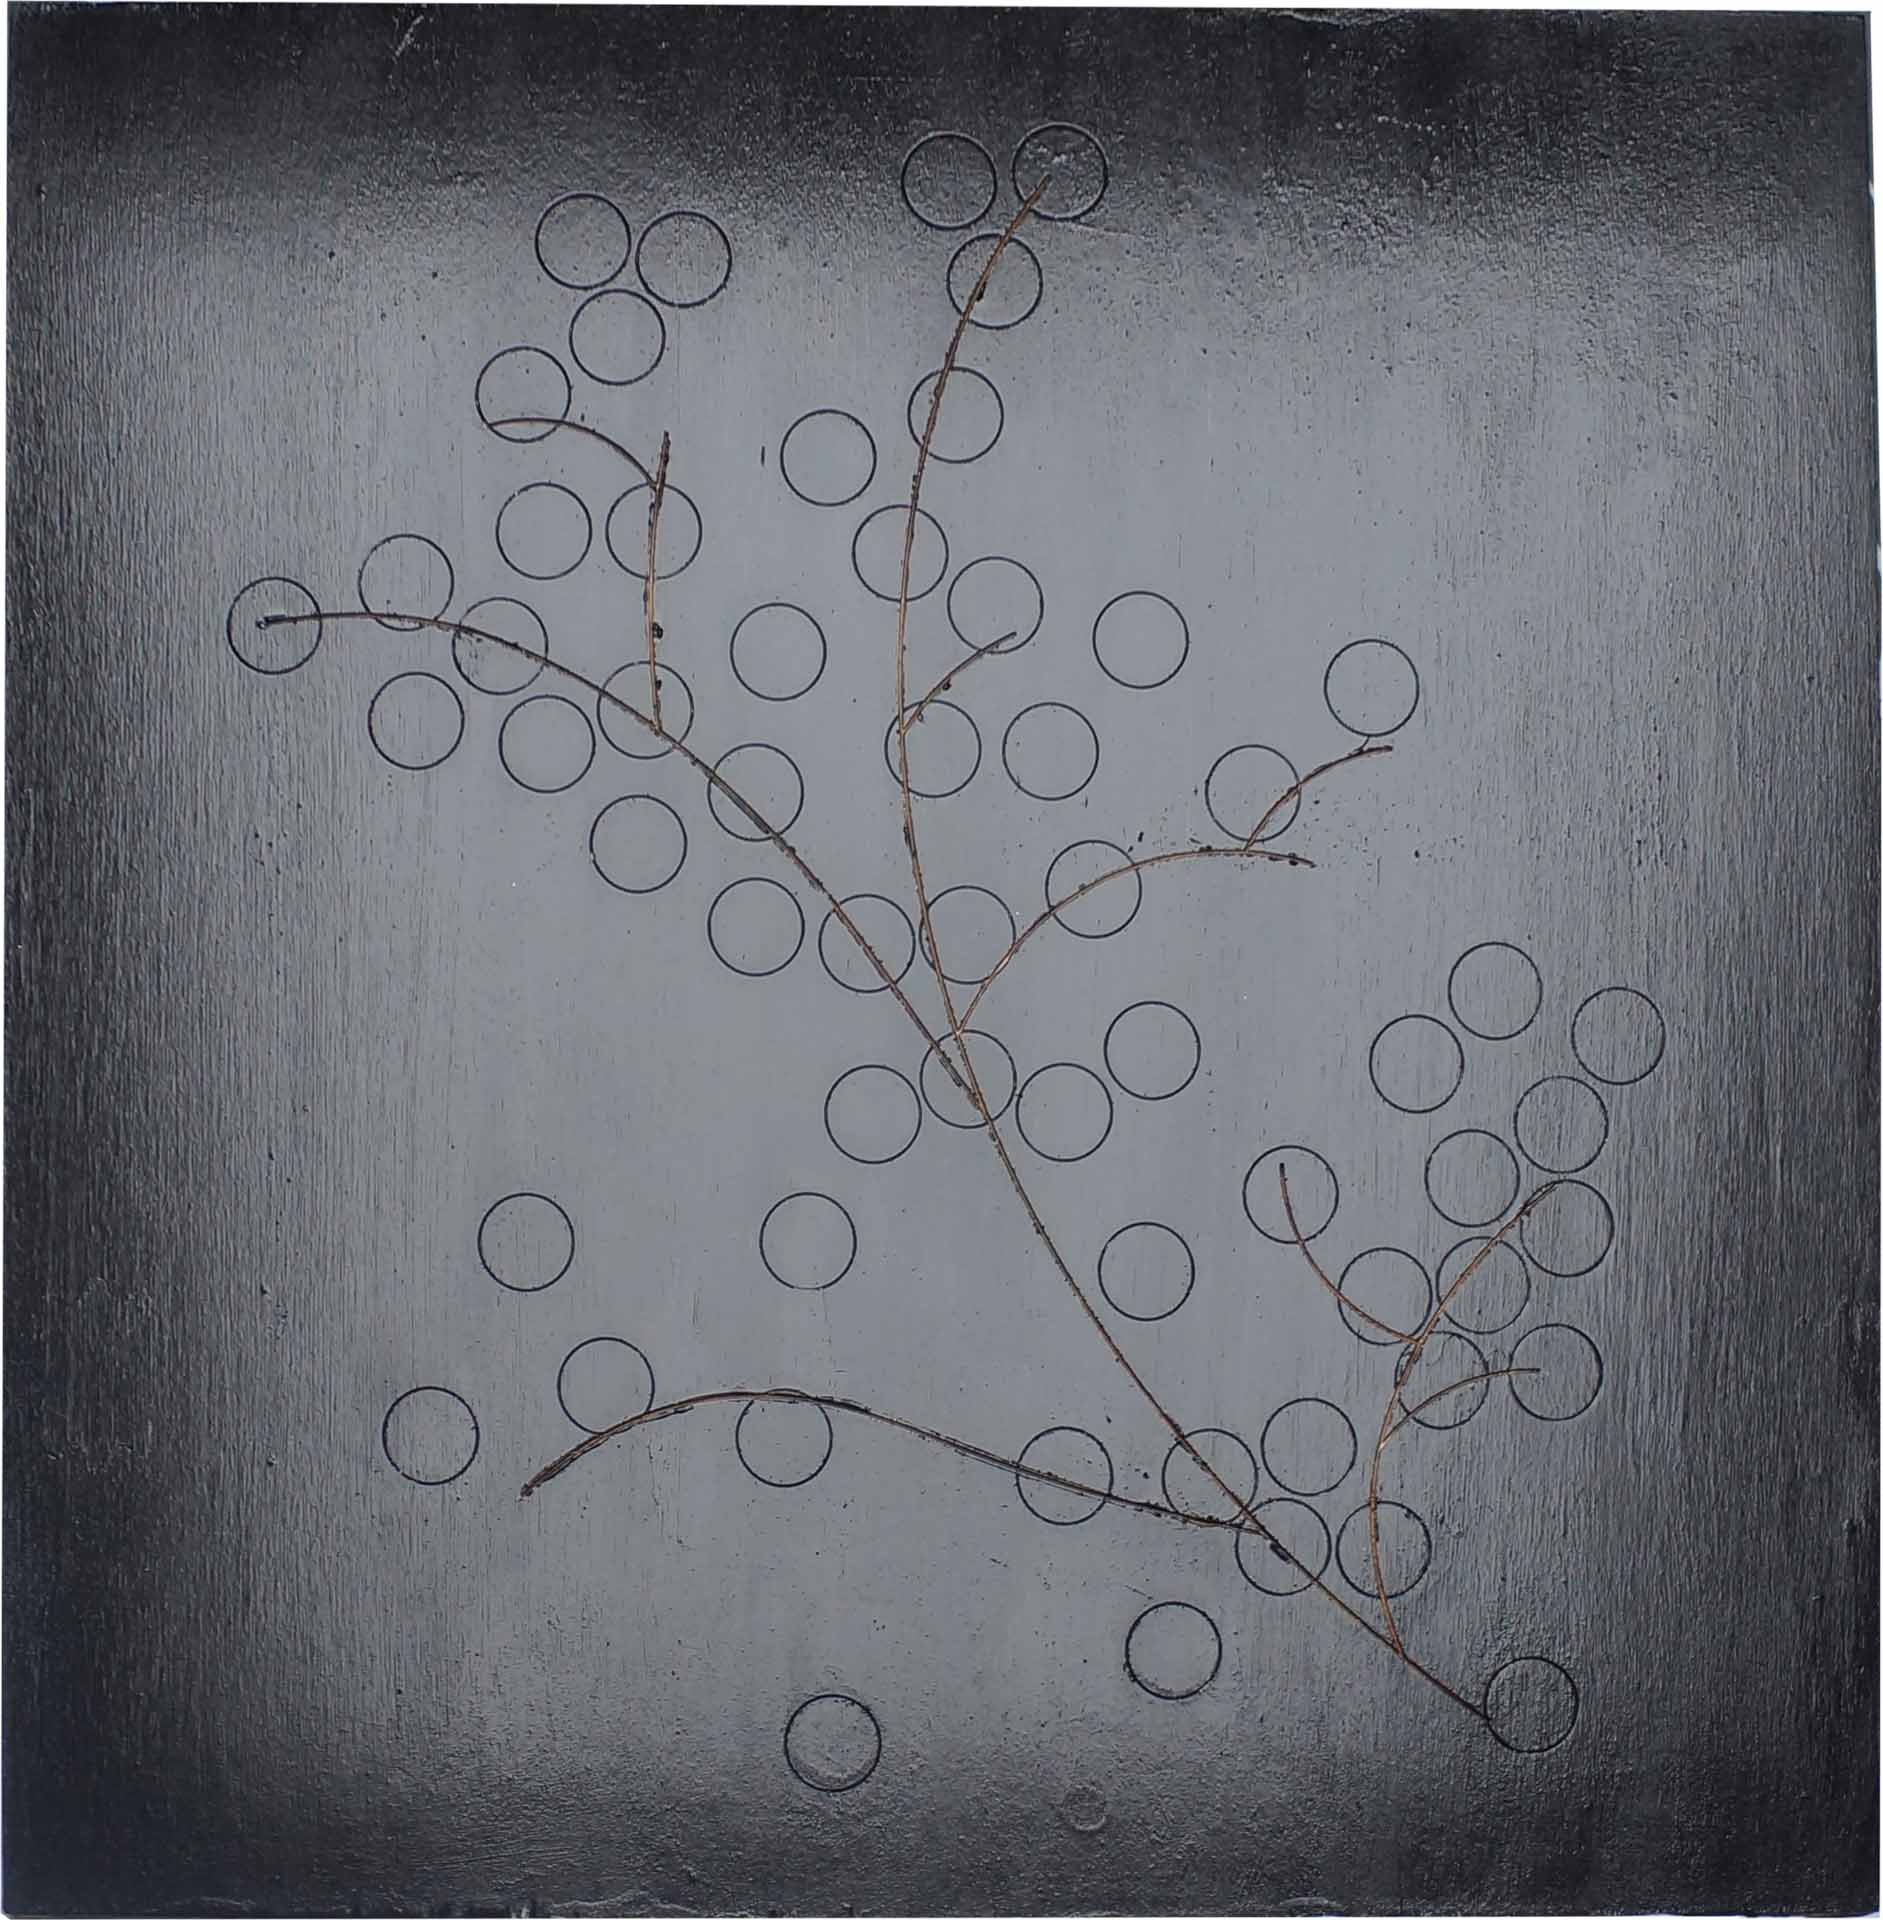 Square black painting with a thin branch carved into the surface. Many small circles are also visible on the surface of the painting, although they are not as definitively carved.